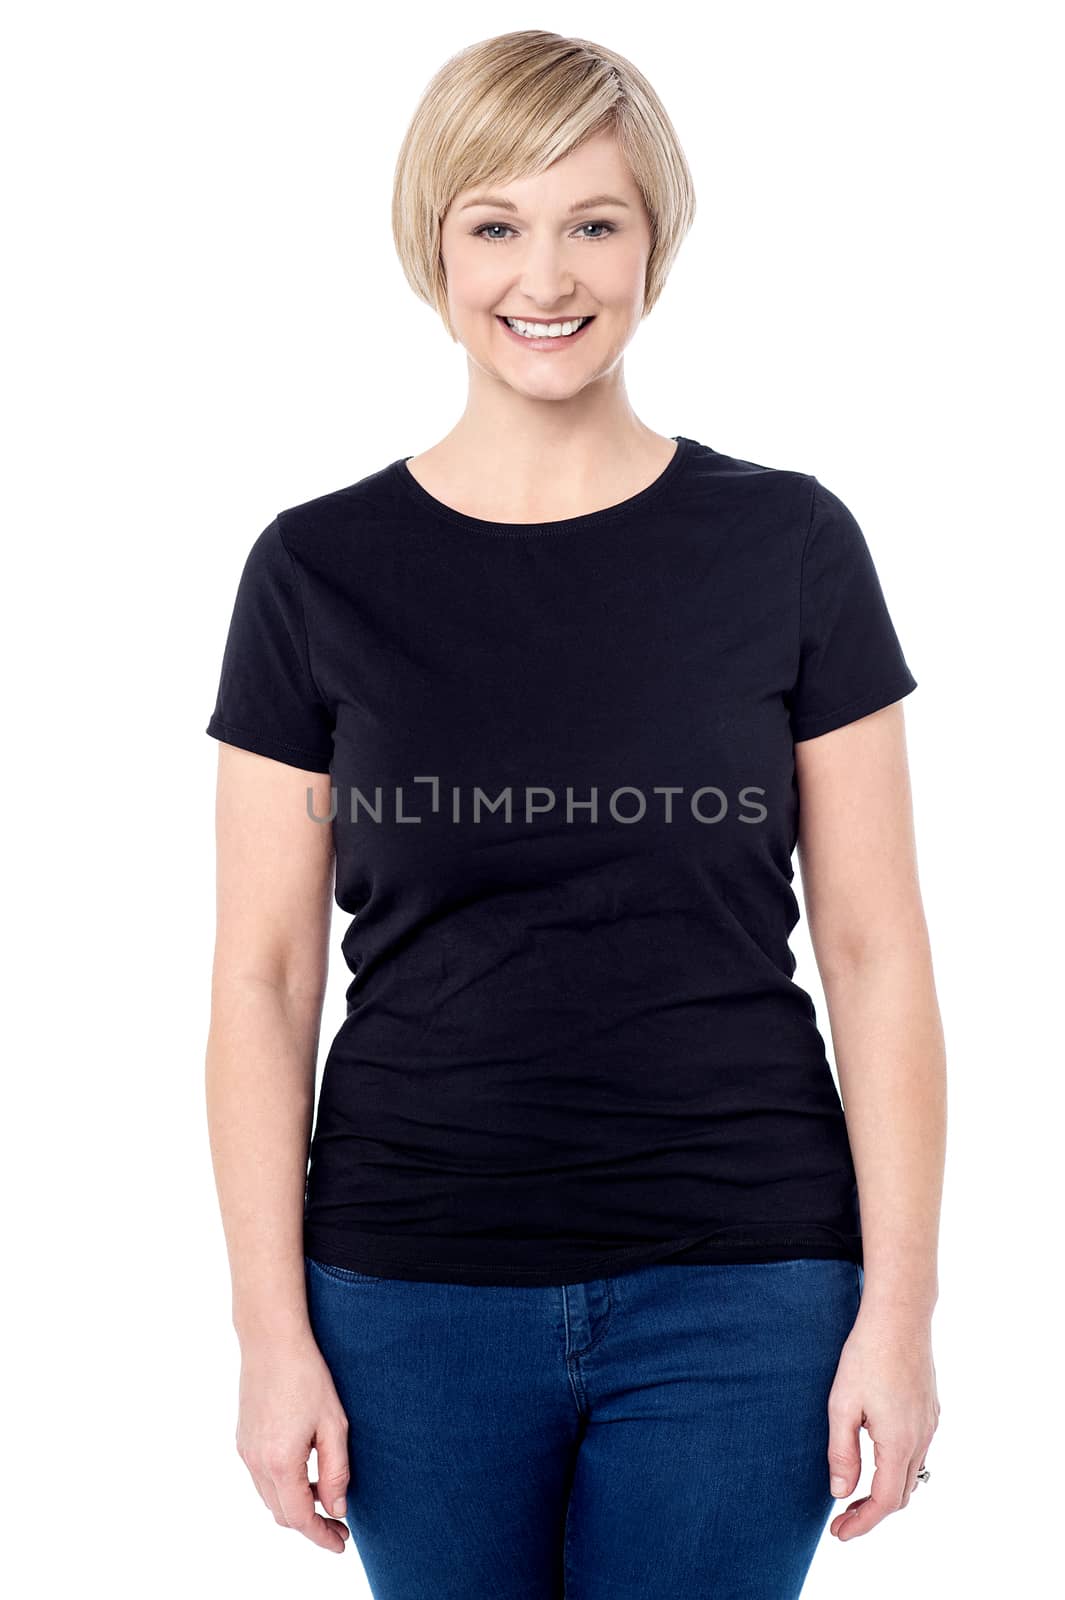 Smiling middle aged woman posing casually